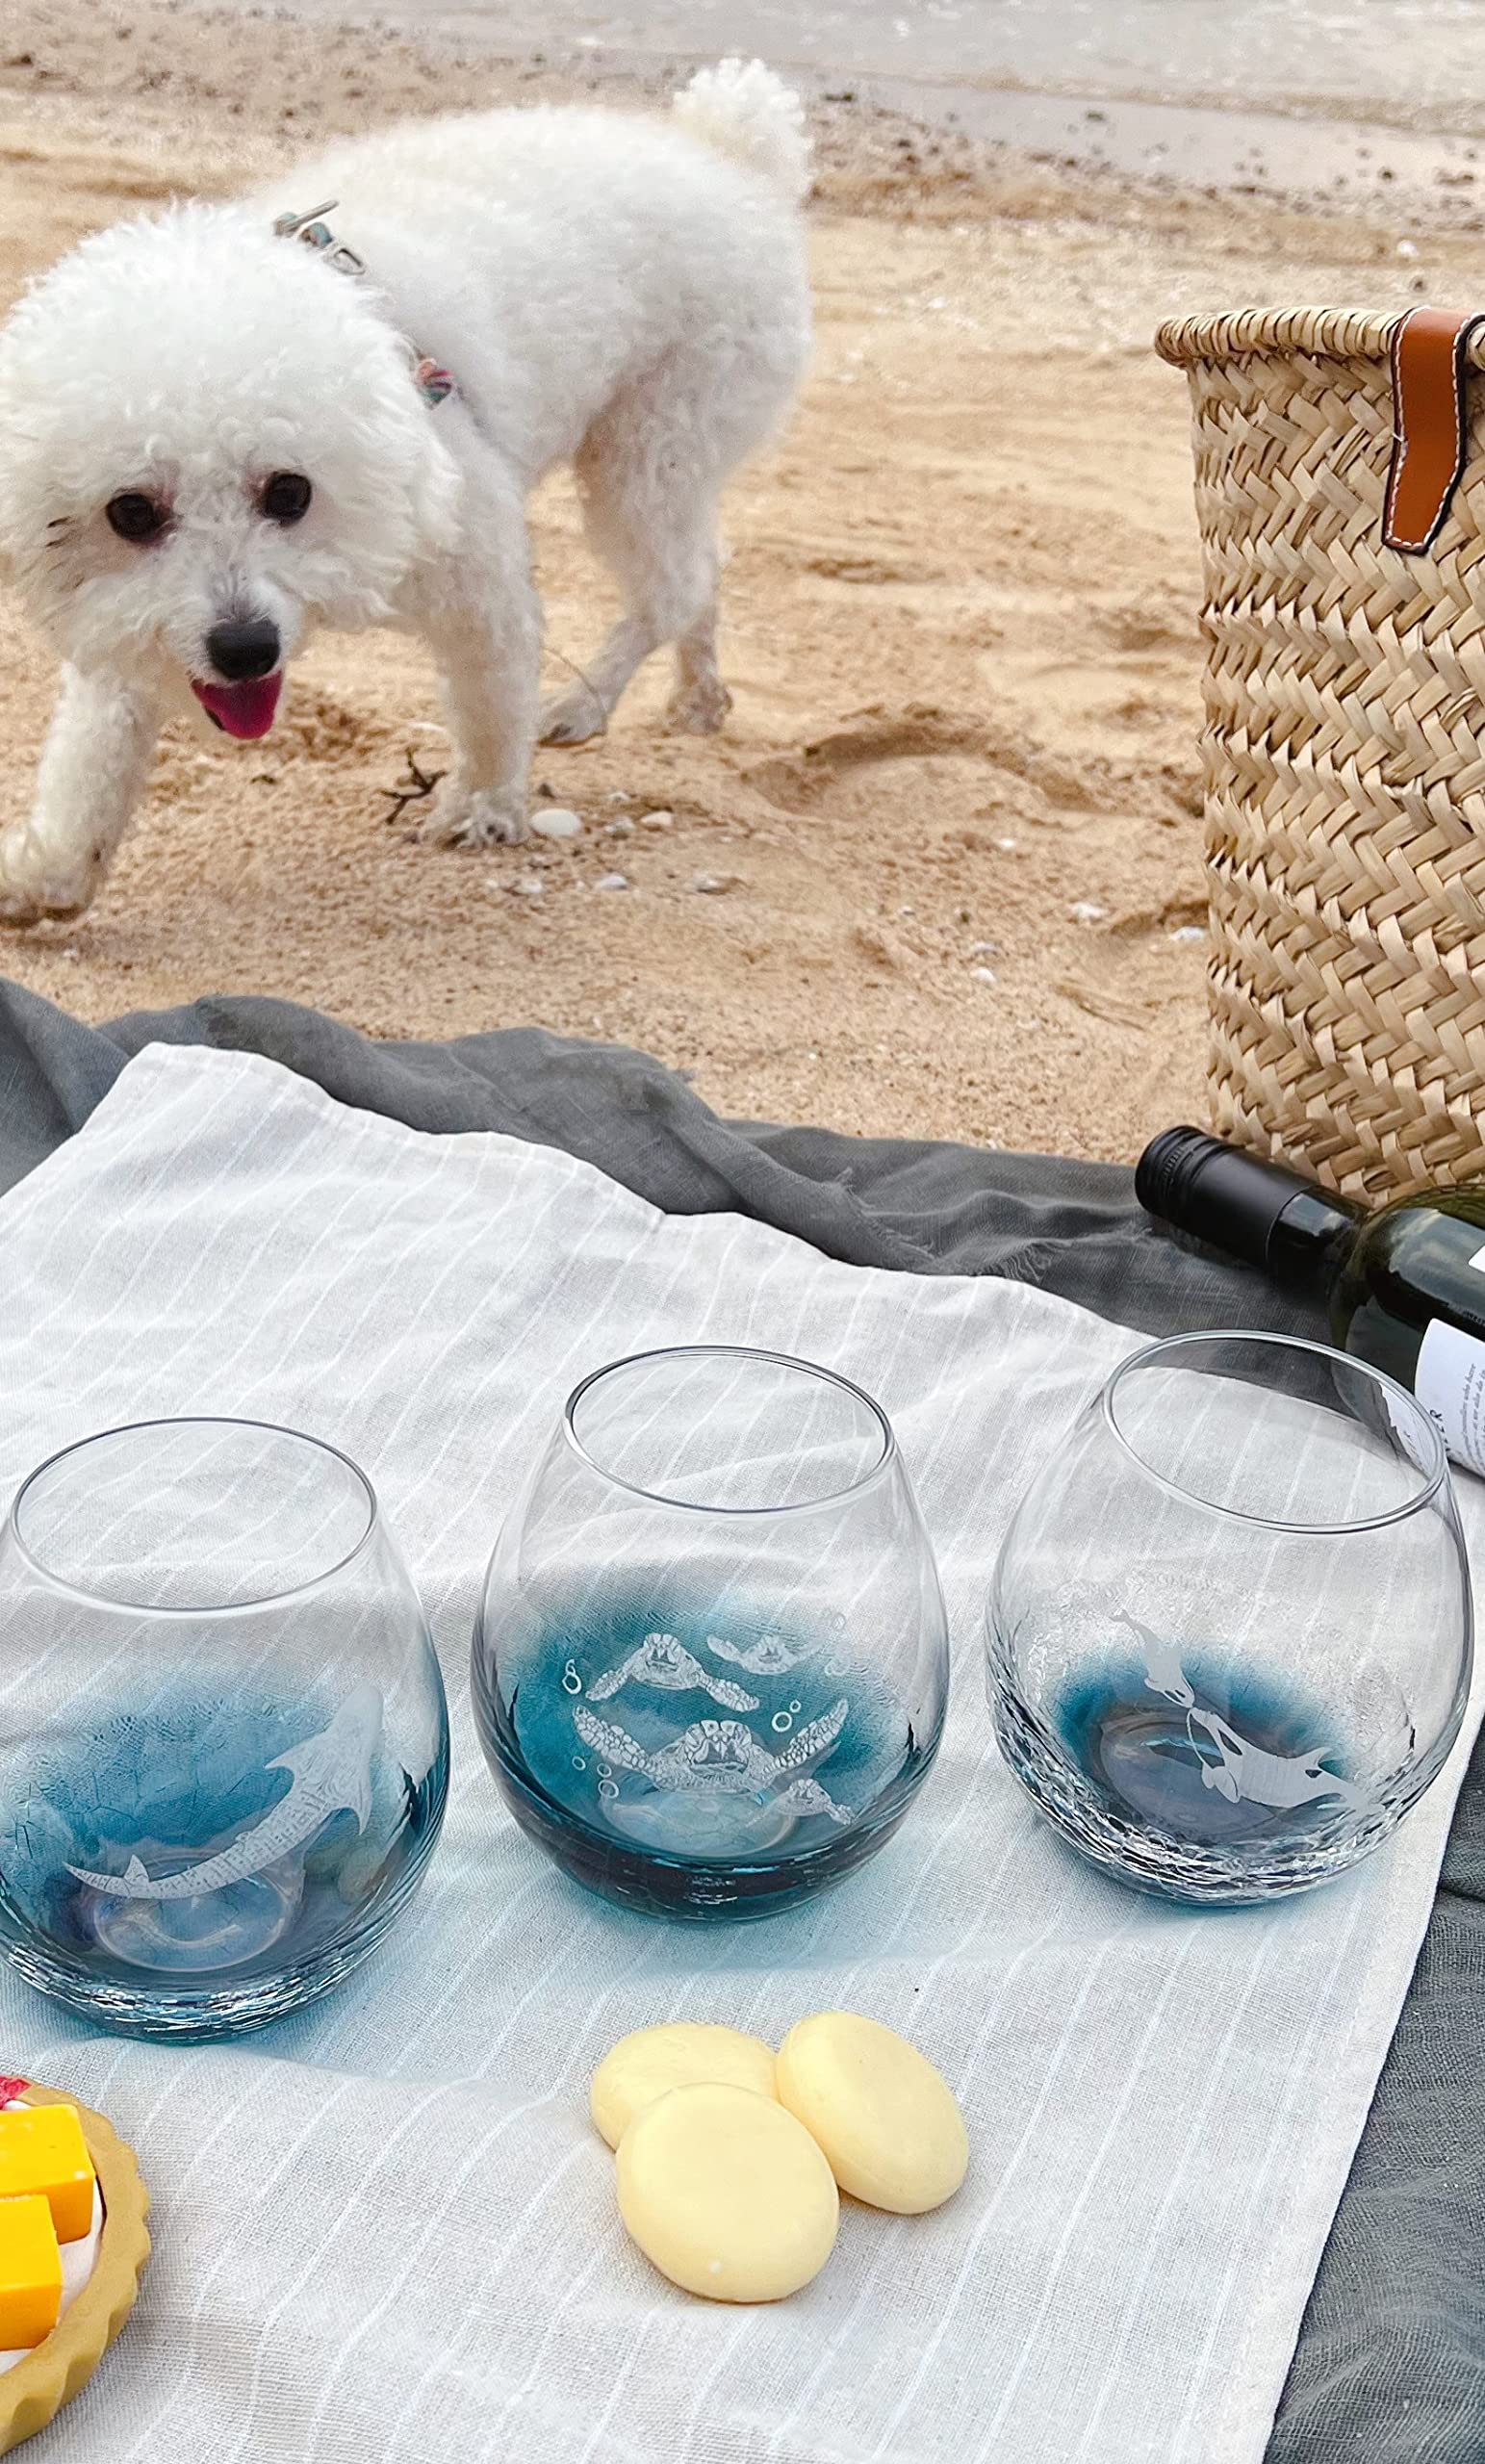 Mothers Day Gifts for Mom and Grandma, Etched Sea Turtles Family Handmade Engraved Crackle Turquoise Beach Wine Glasses